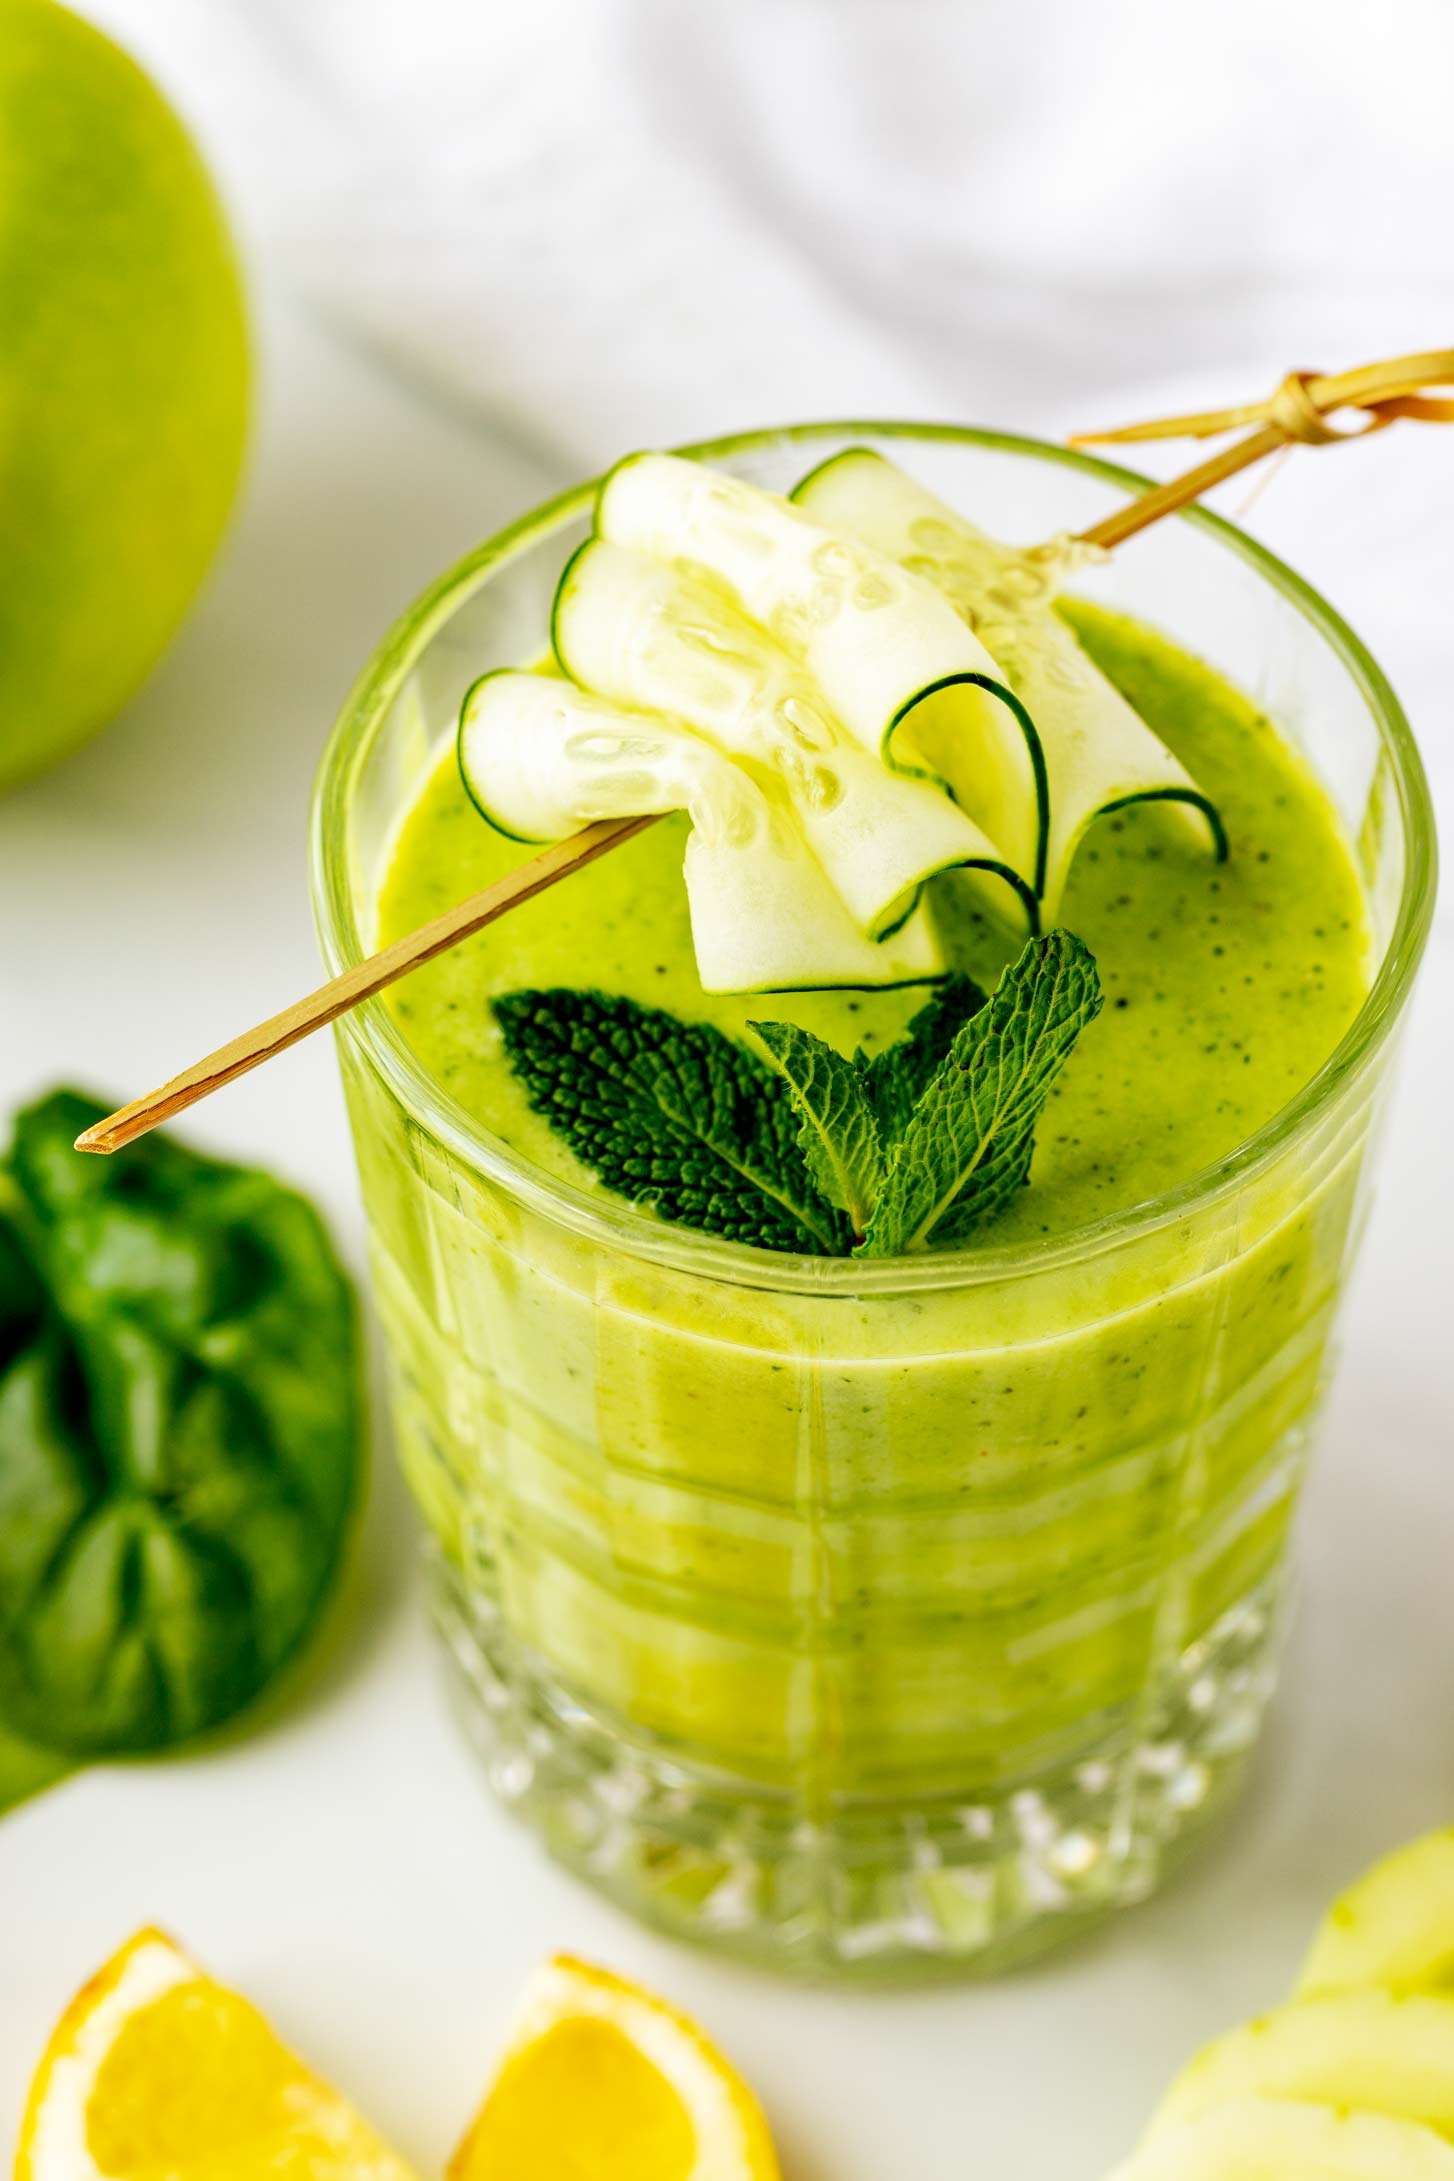 Photo of a small glass with a cucumber apple smoothie garnished with mint and cucumber.